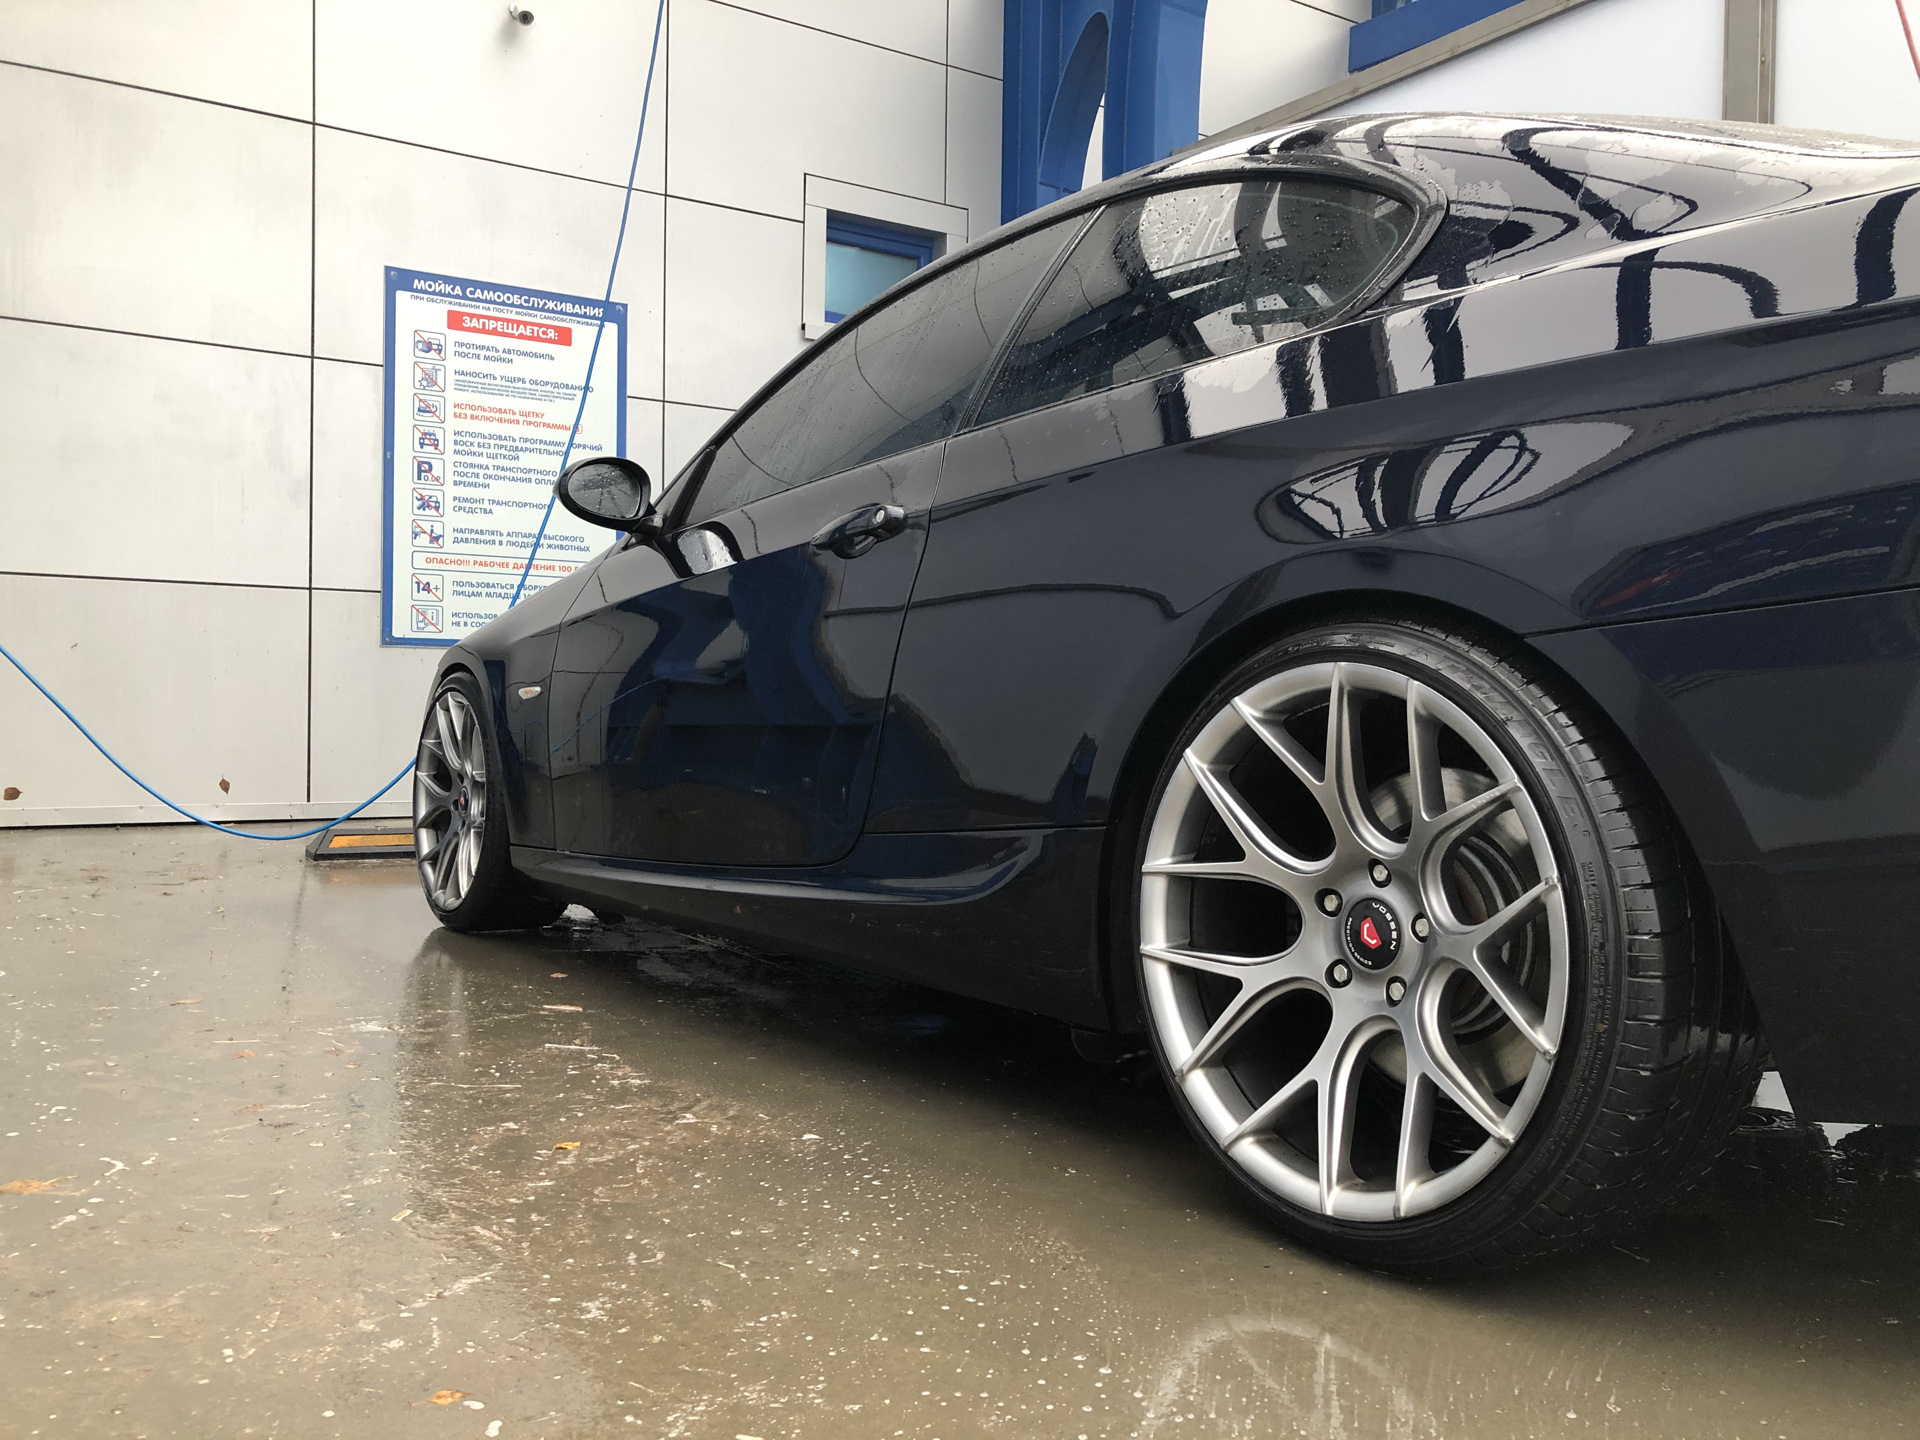 5 18 x 6 25. Inforged ifg6. Диск Inforged ifg23. Inforged ifg6 BMW. Inforged BMW f30.